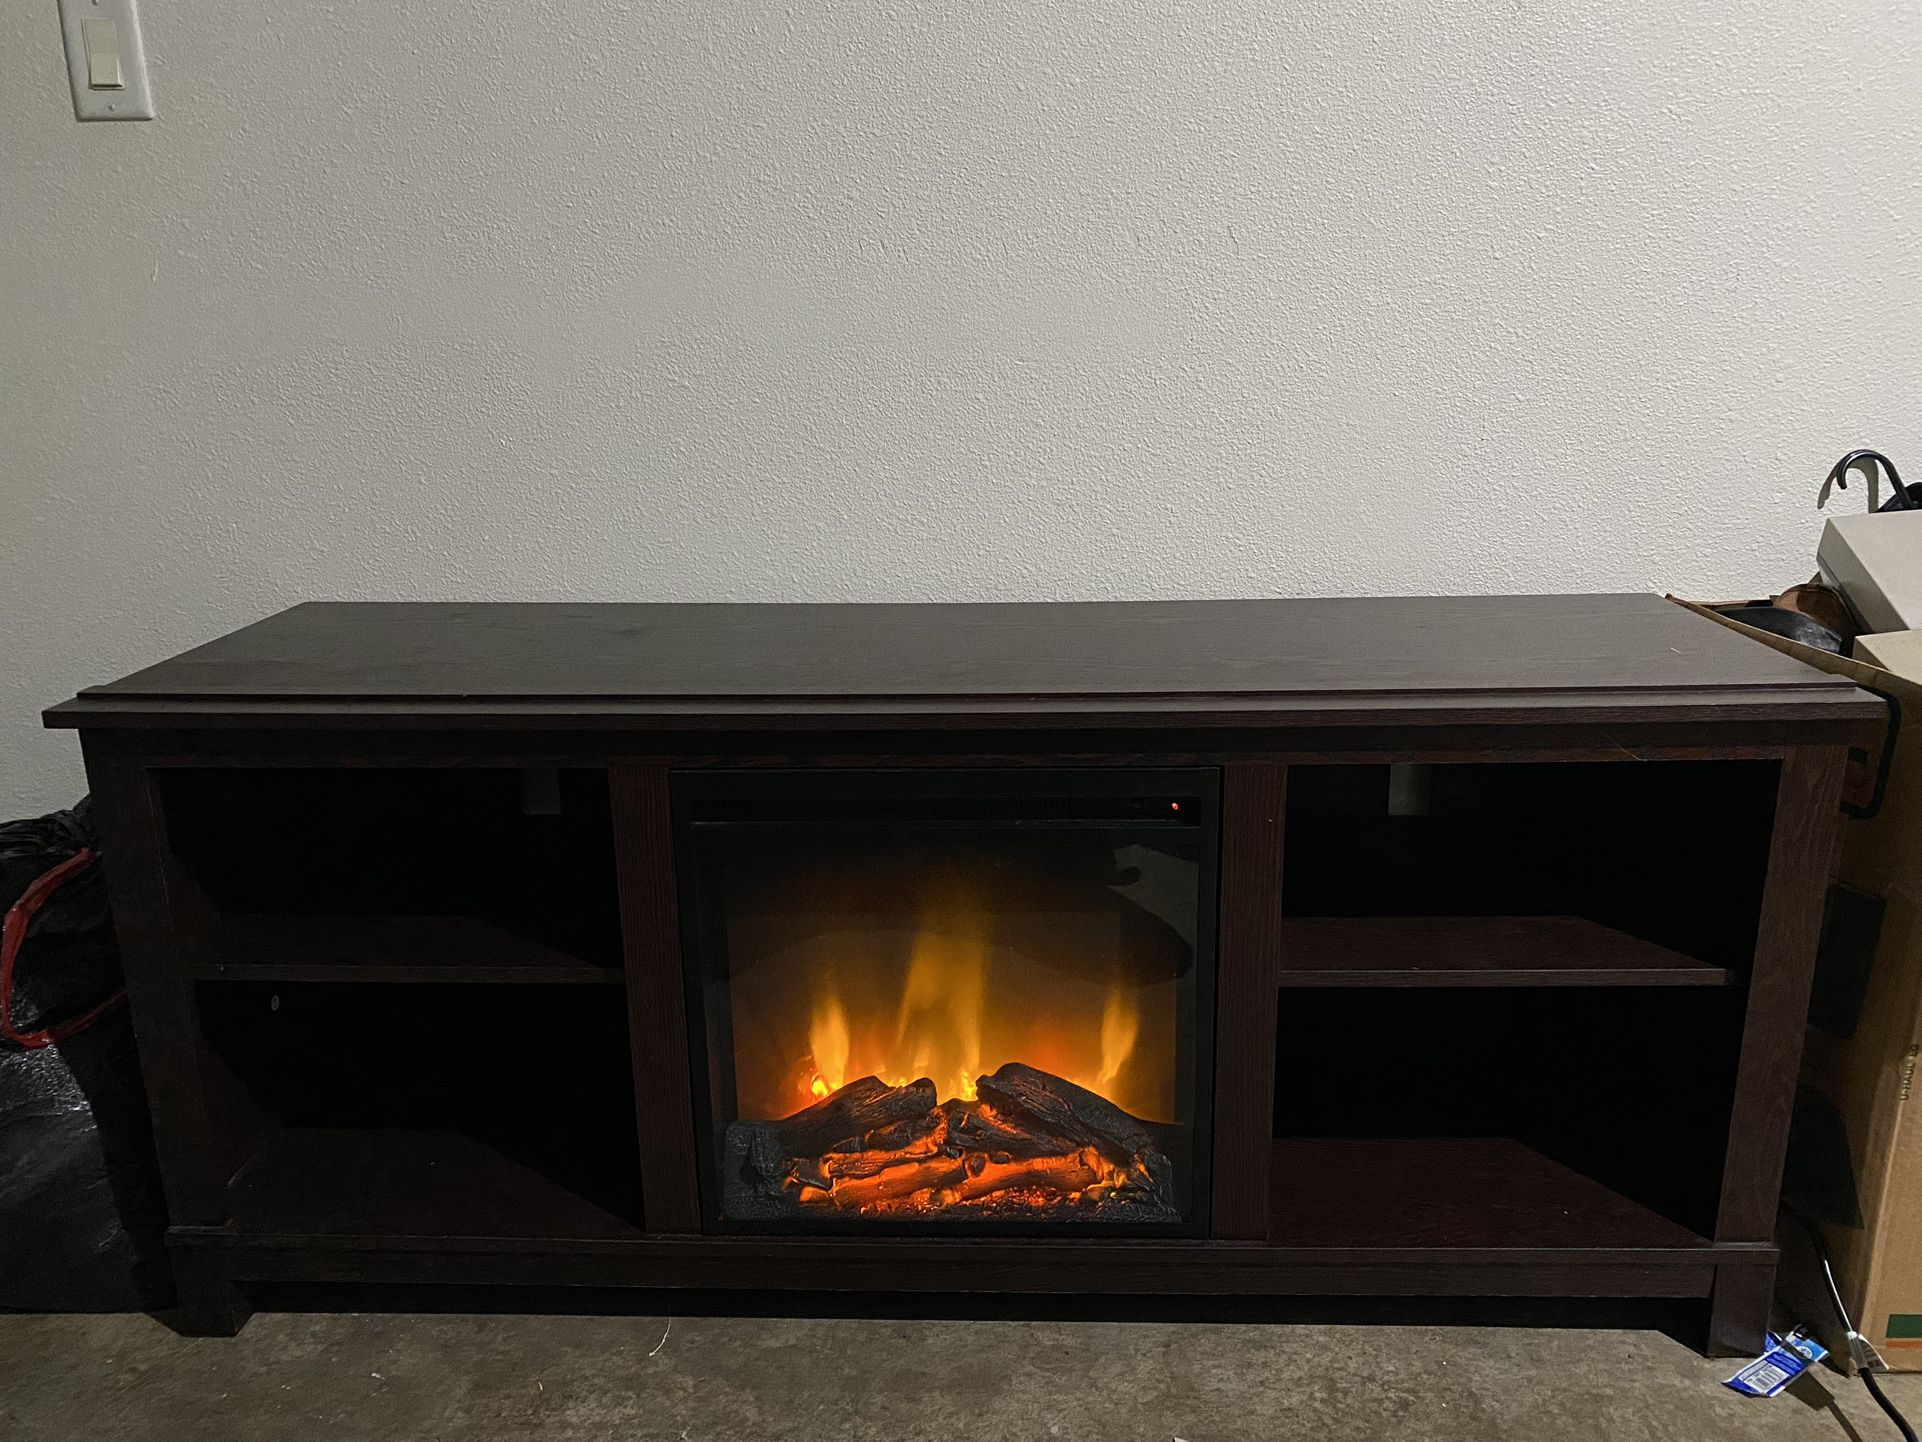 Digital Electric Fireplace Entertainment Center With Heater